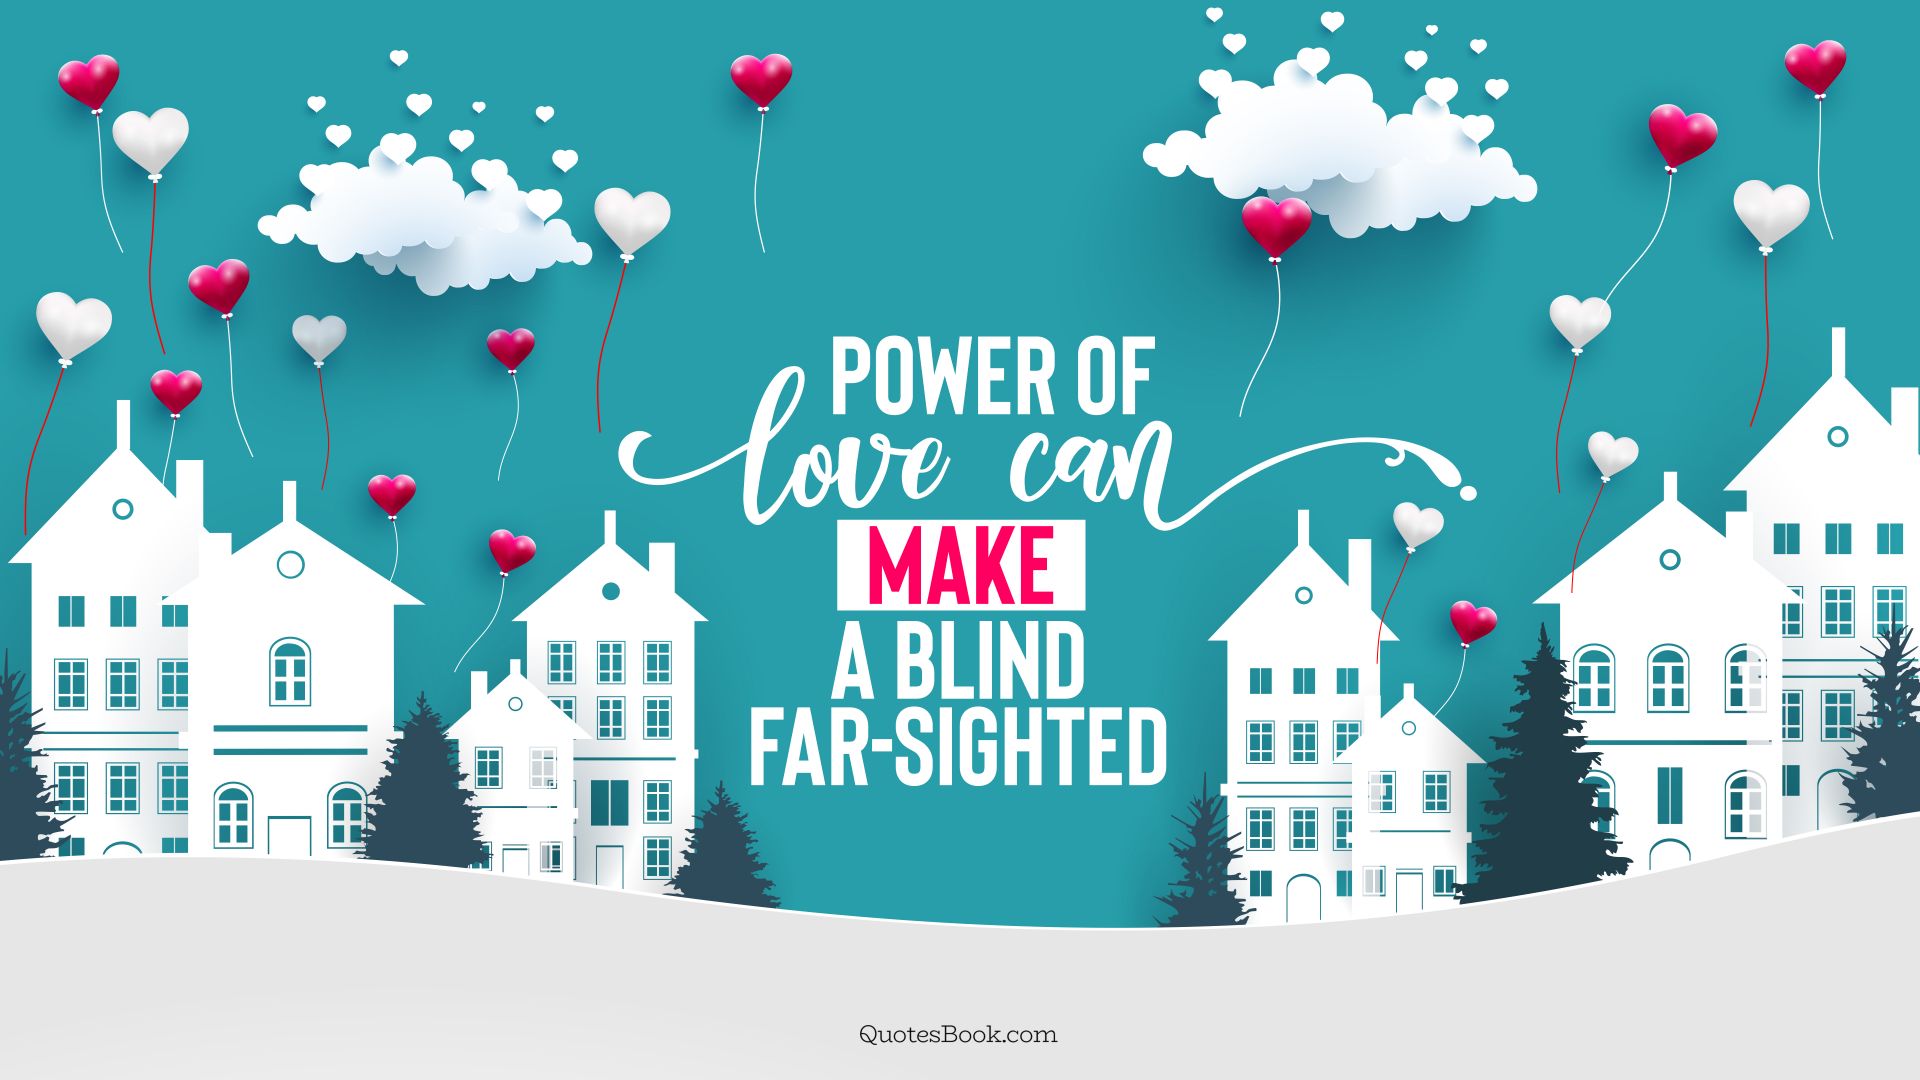 Power of love can make a blind far-sighted